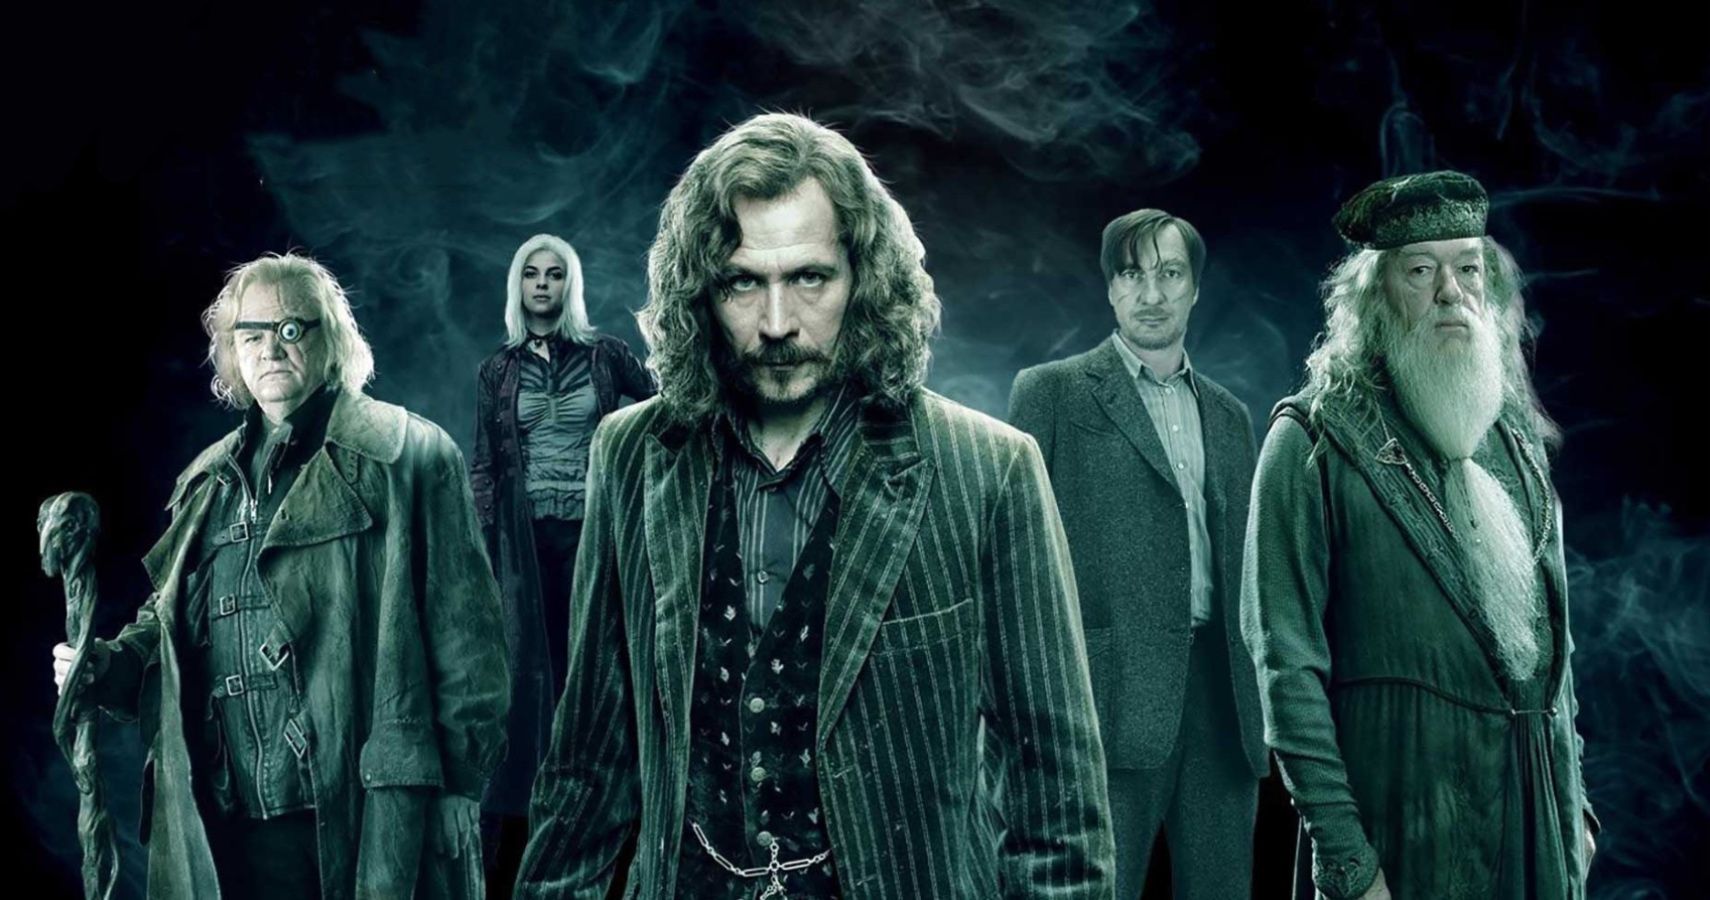 Harry Potter Why Fans Want An Original Order Of The Phoenix Prequel Series